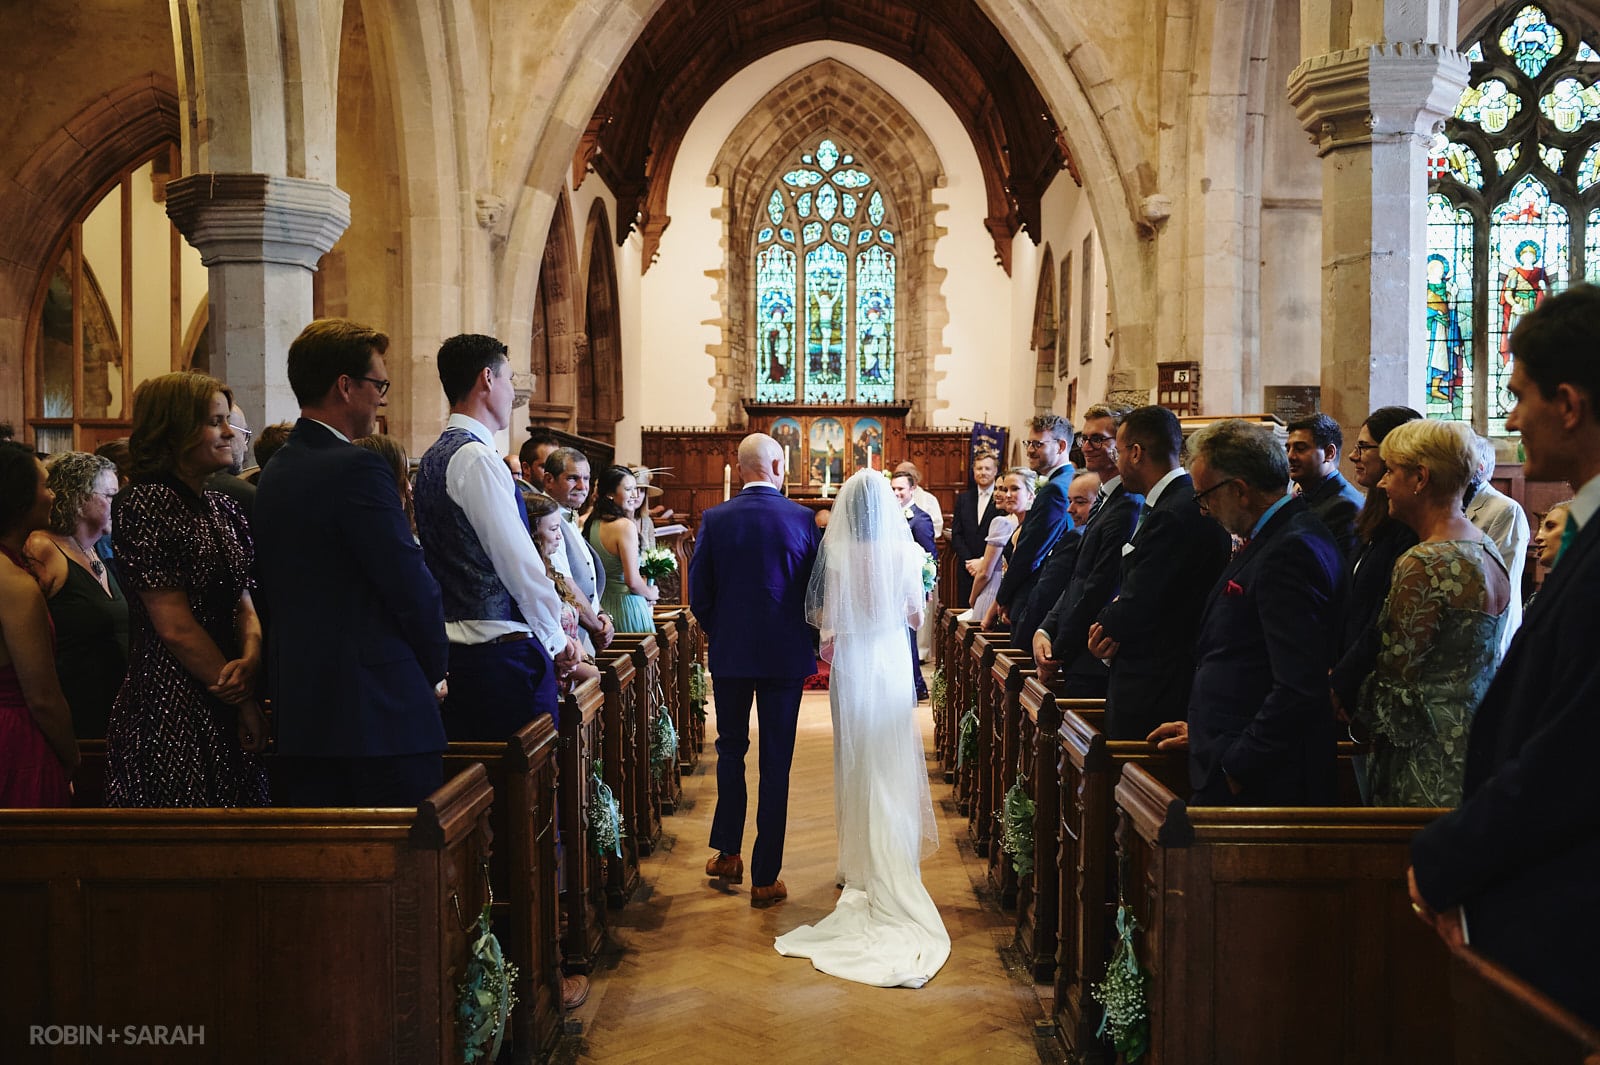 Bride and father enter wedding ceremony at St Peter's church Dunchurch as groom reacts